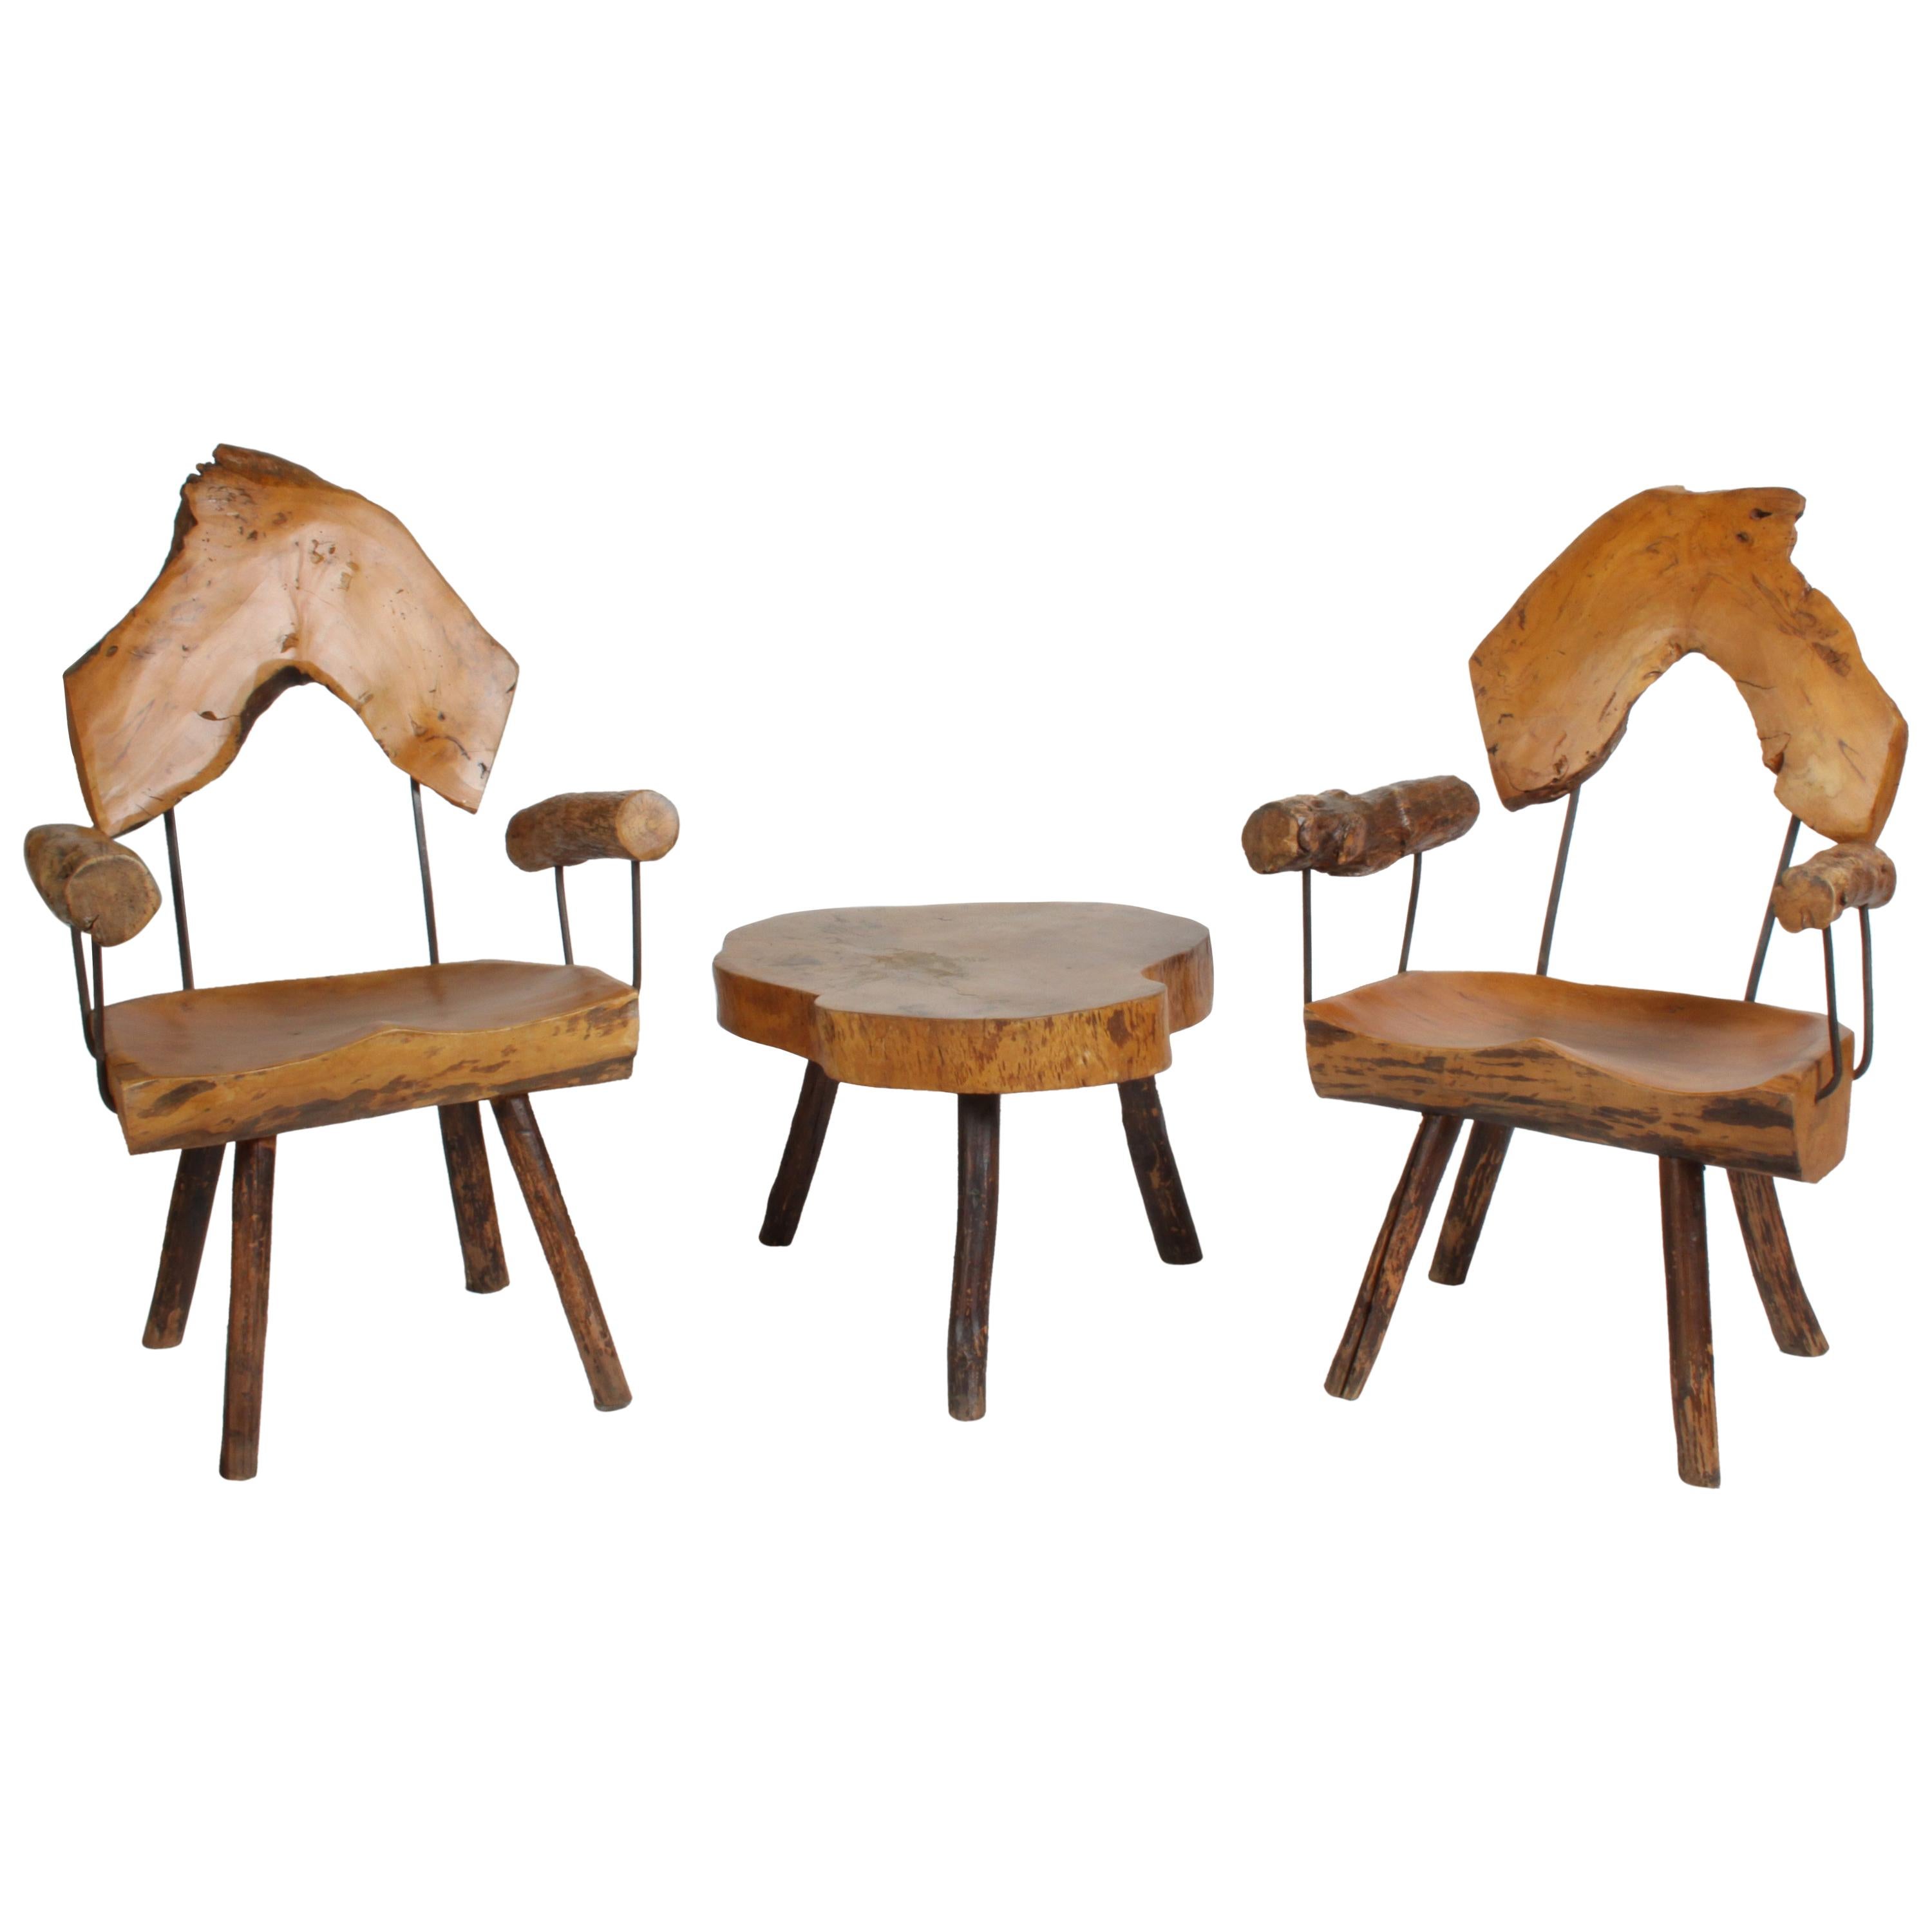 Pair of Unique Organic / Rustic Midcentury Log Chairs with Side Table For Sale